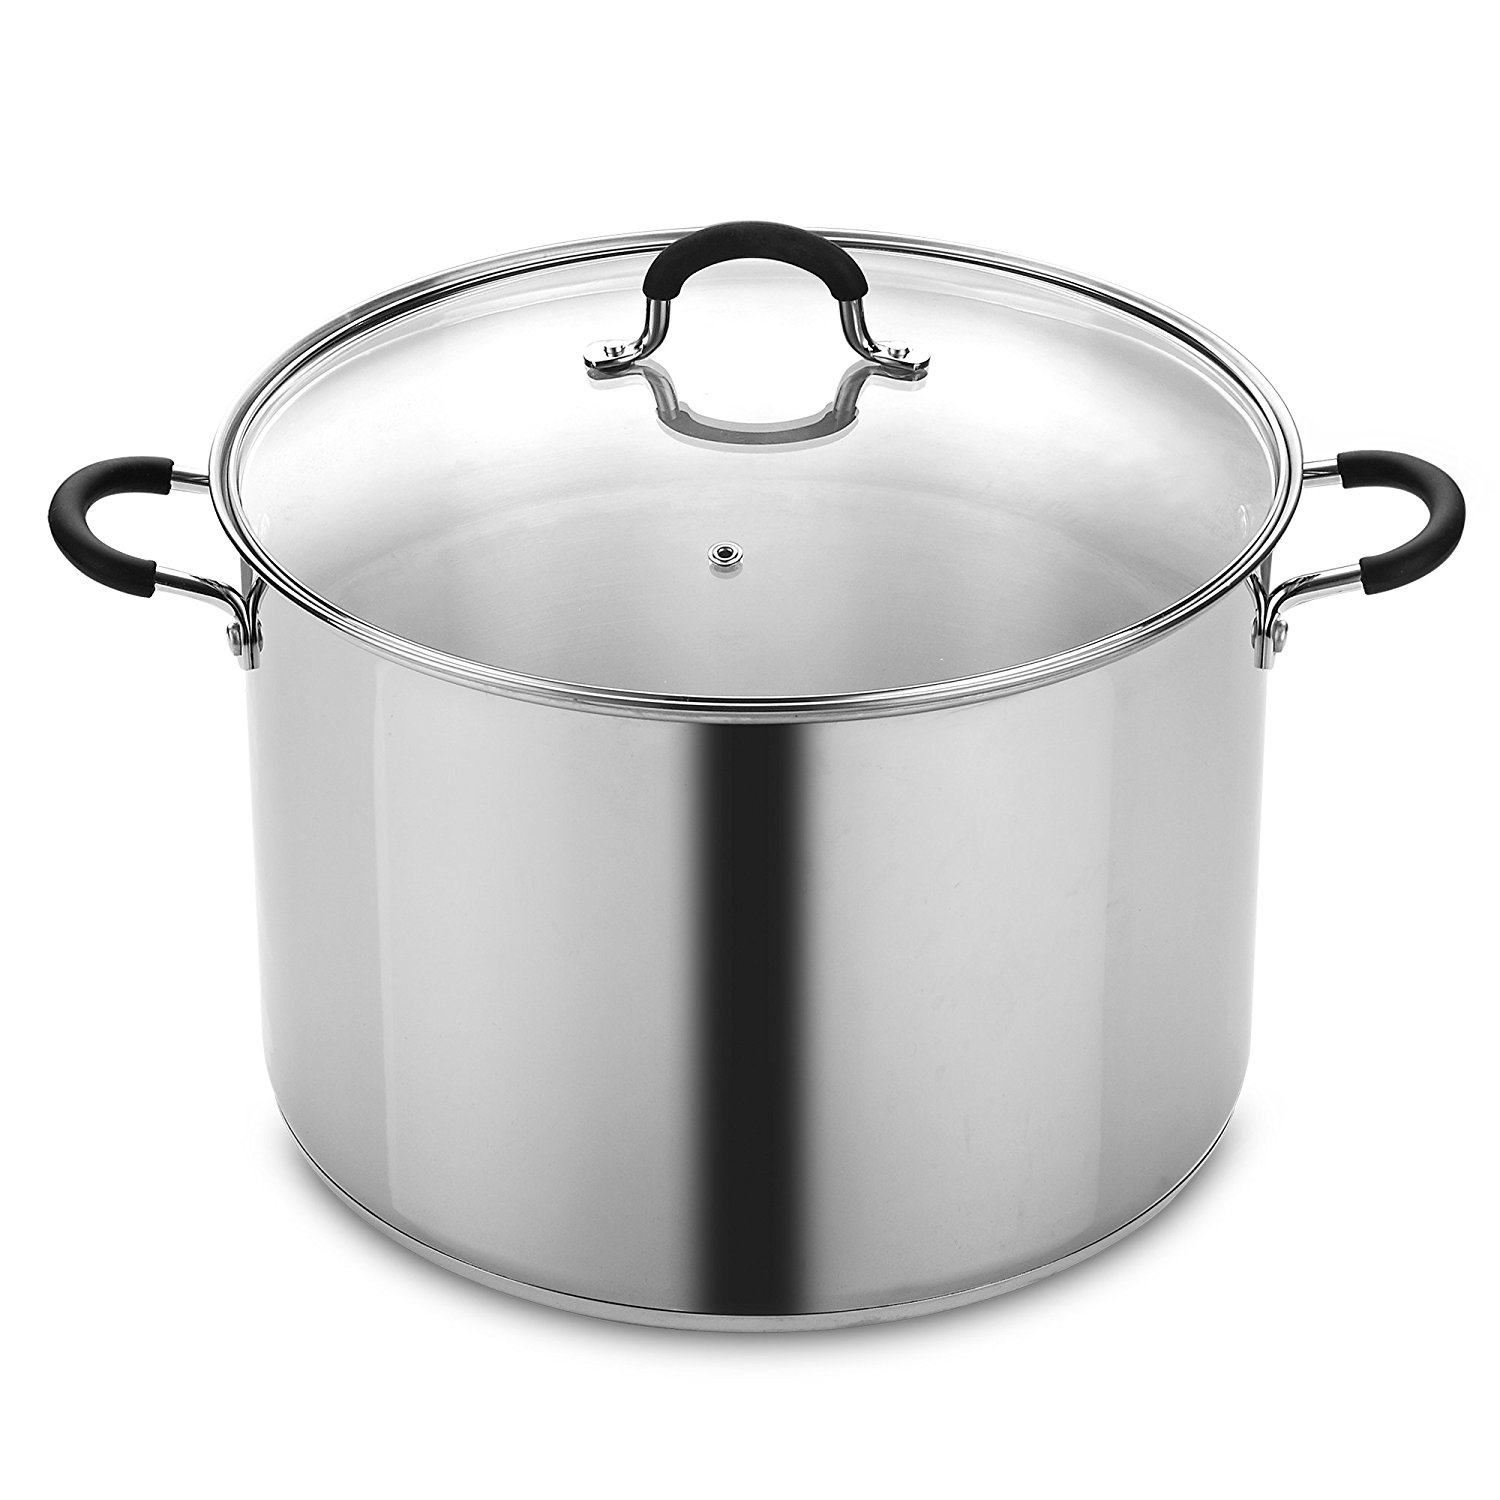 Amazon.com: Cook N Home 20 Quart Stainless Steel Stockpot and ...